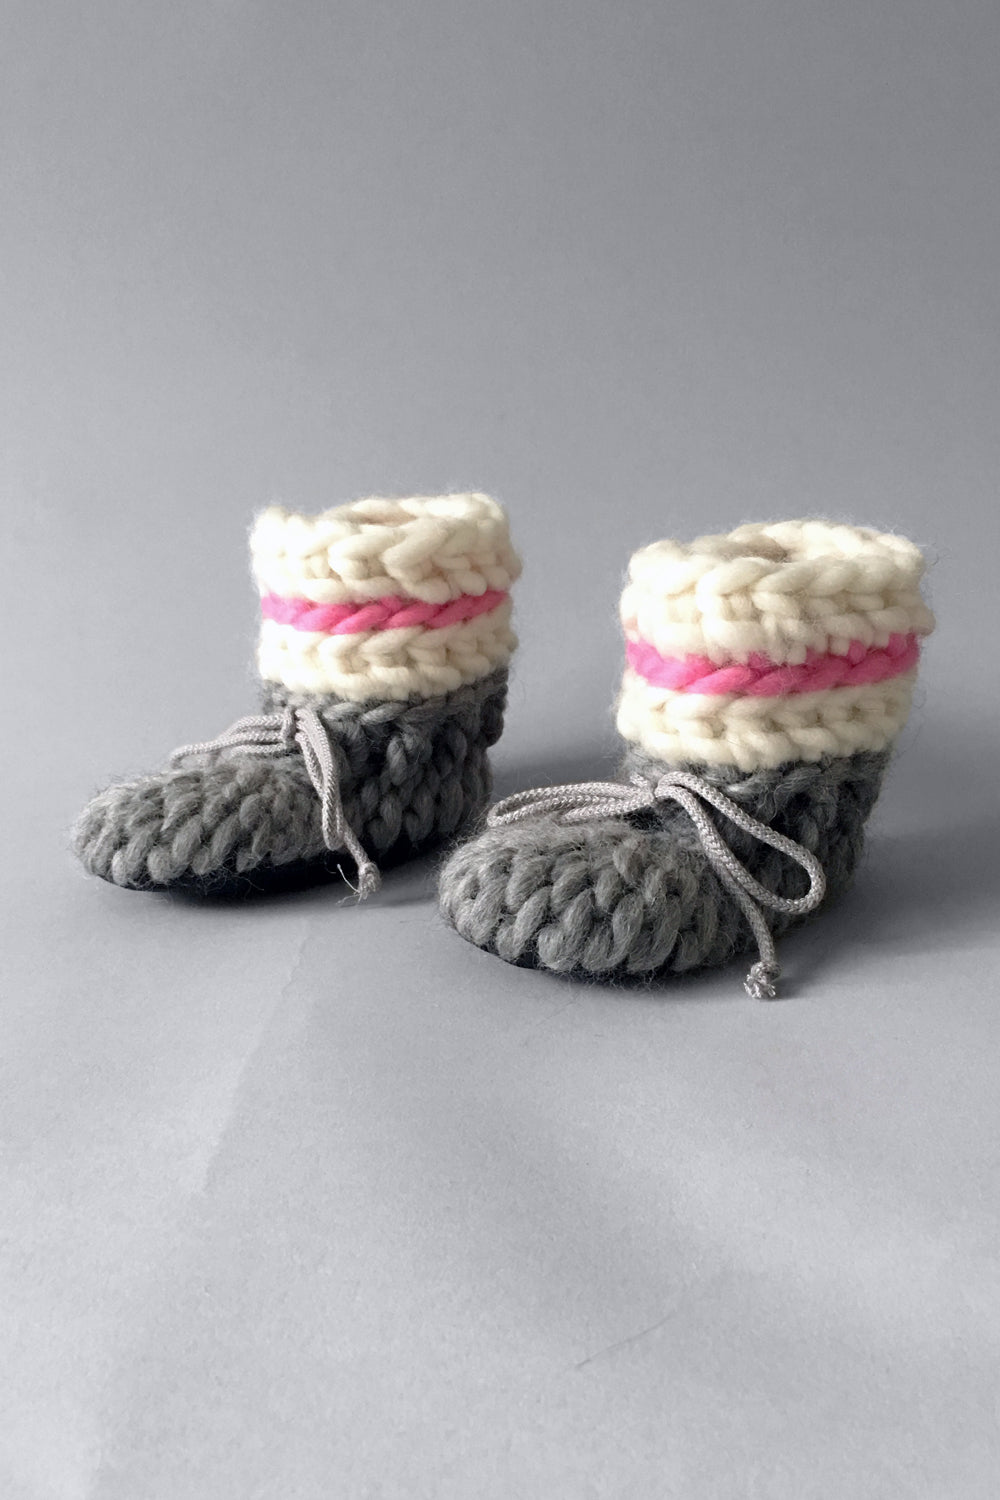 knitted kids booties pink and grey handmade upcycled